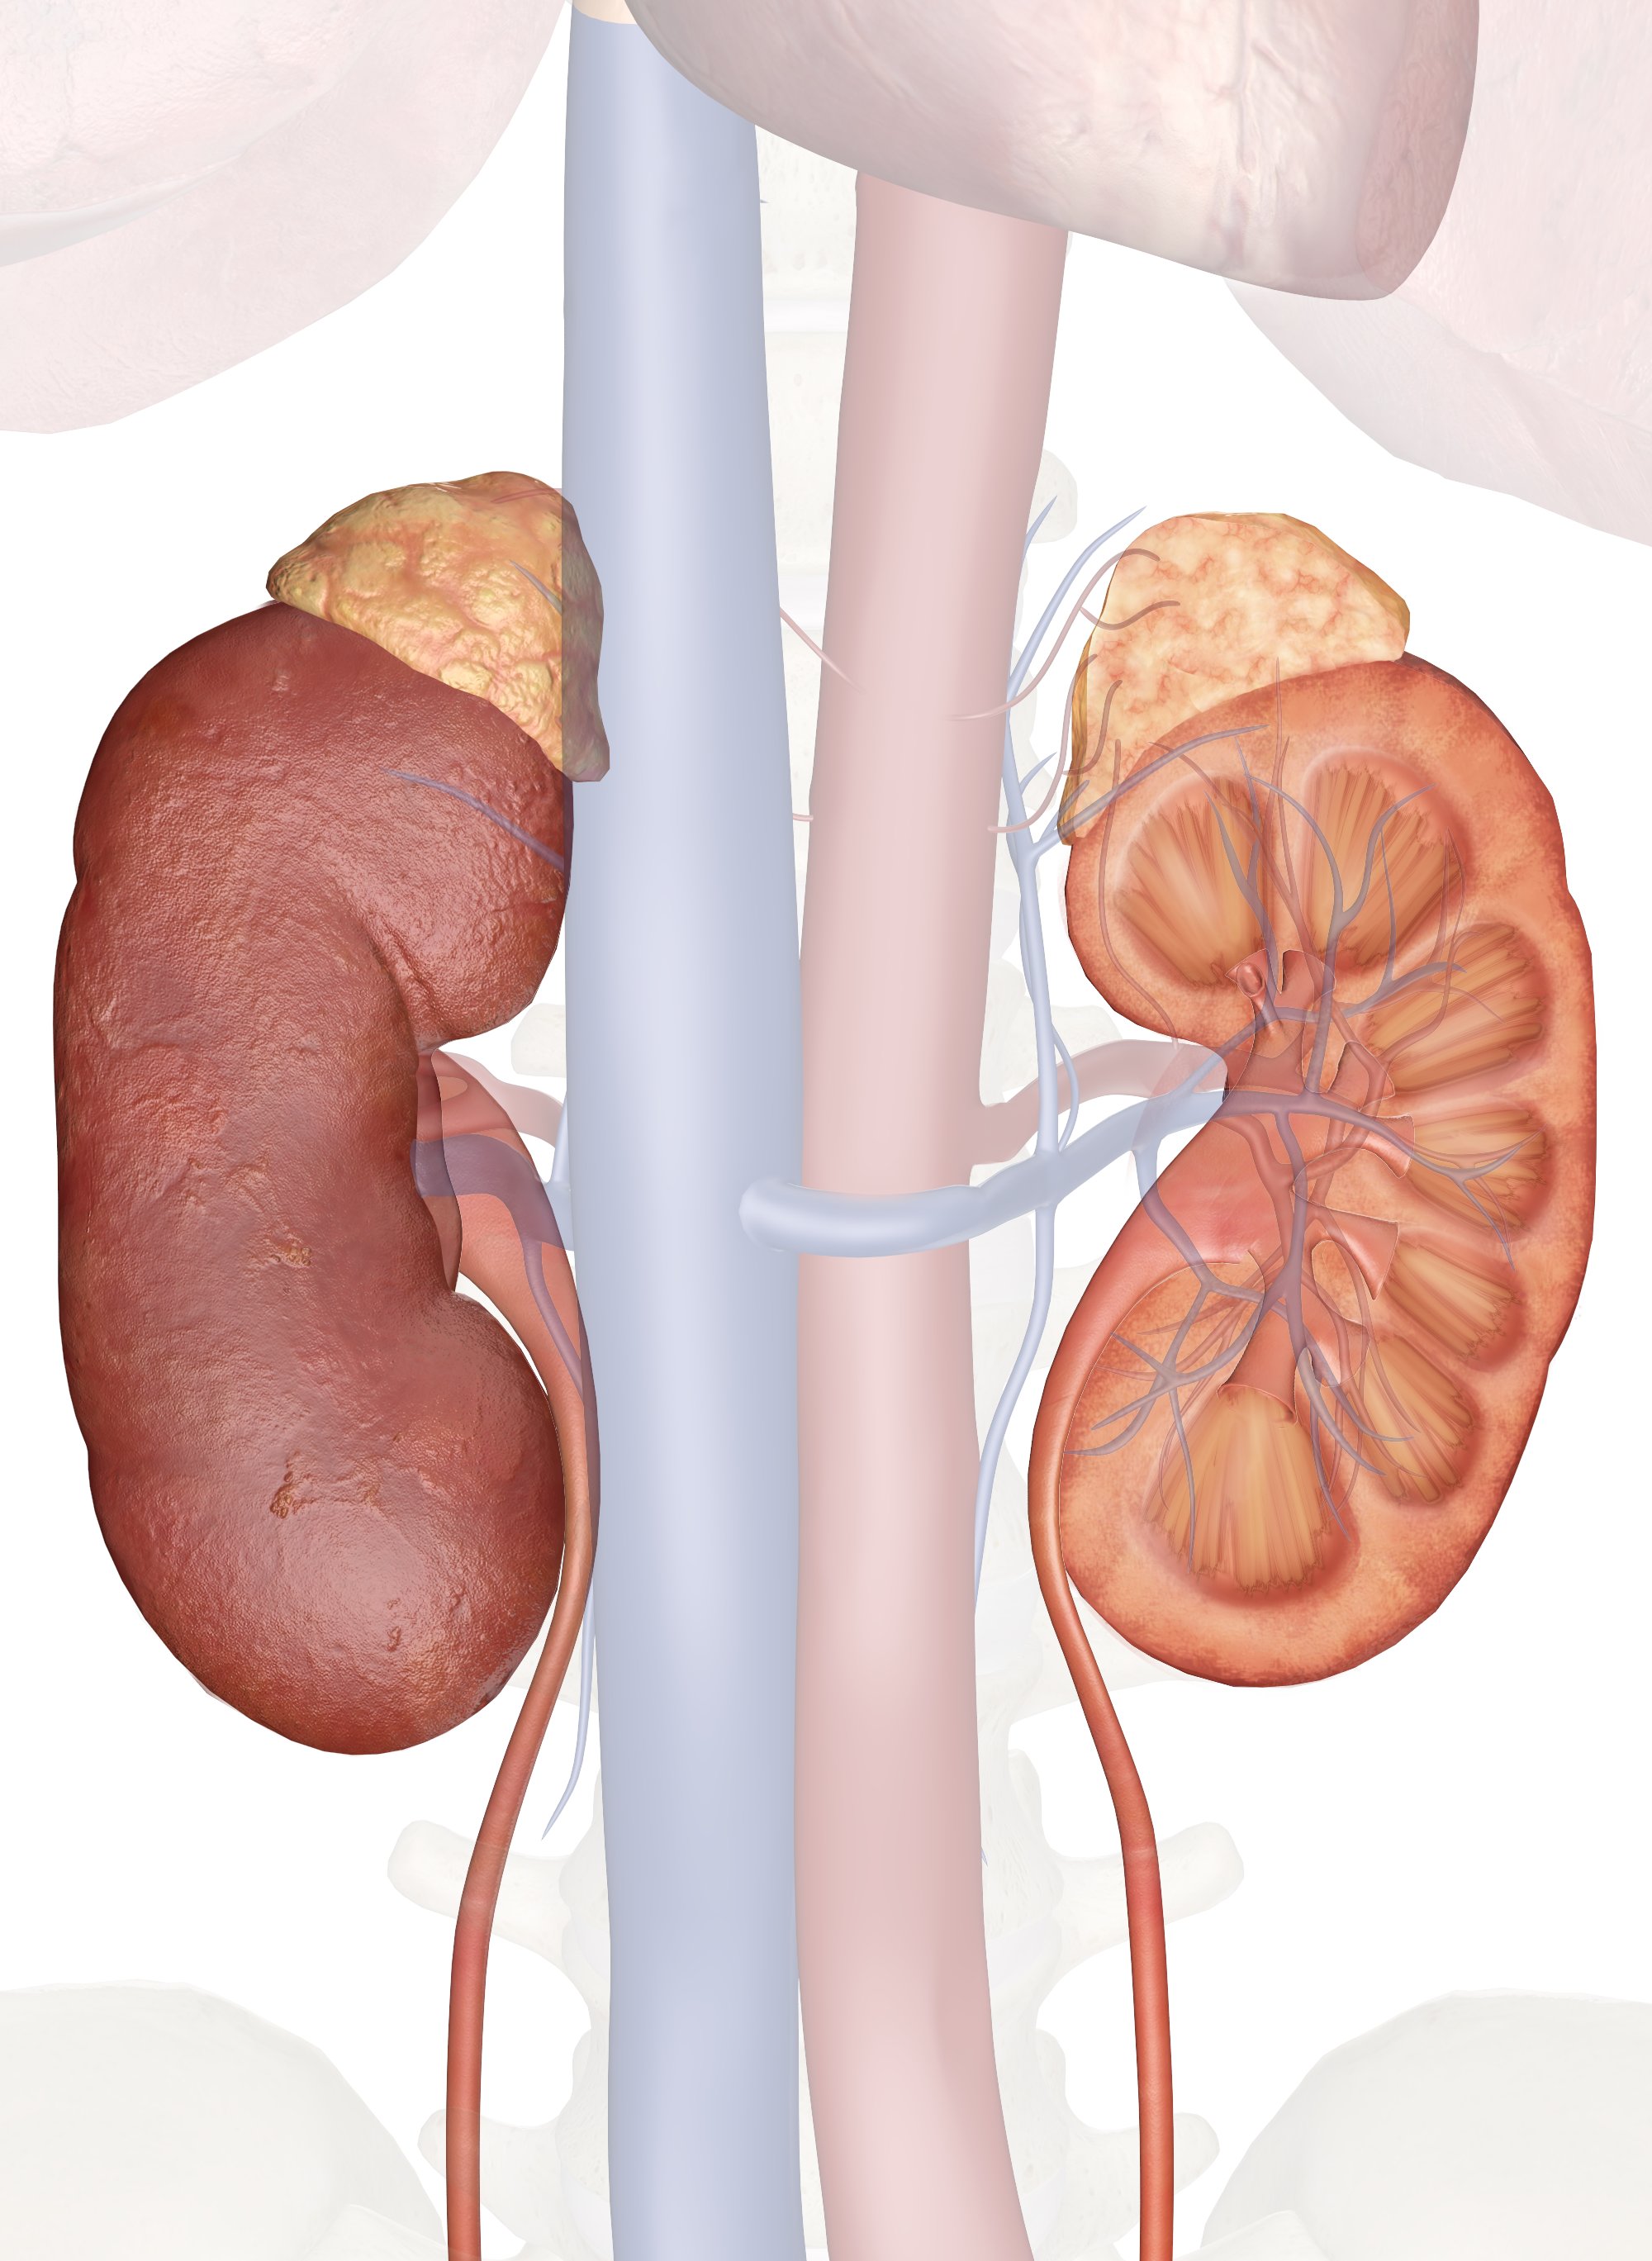 show me pictures of where your kidneys are located